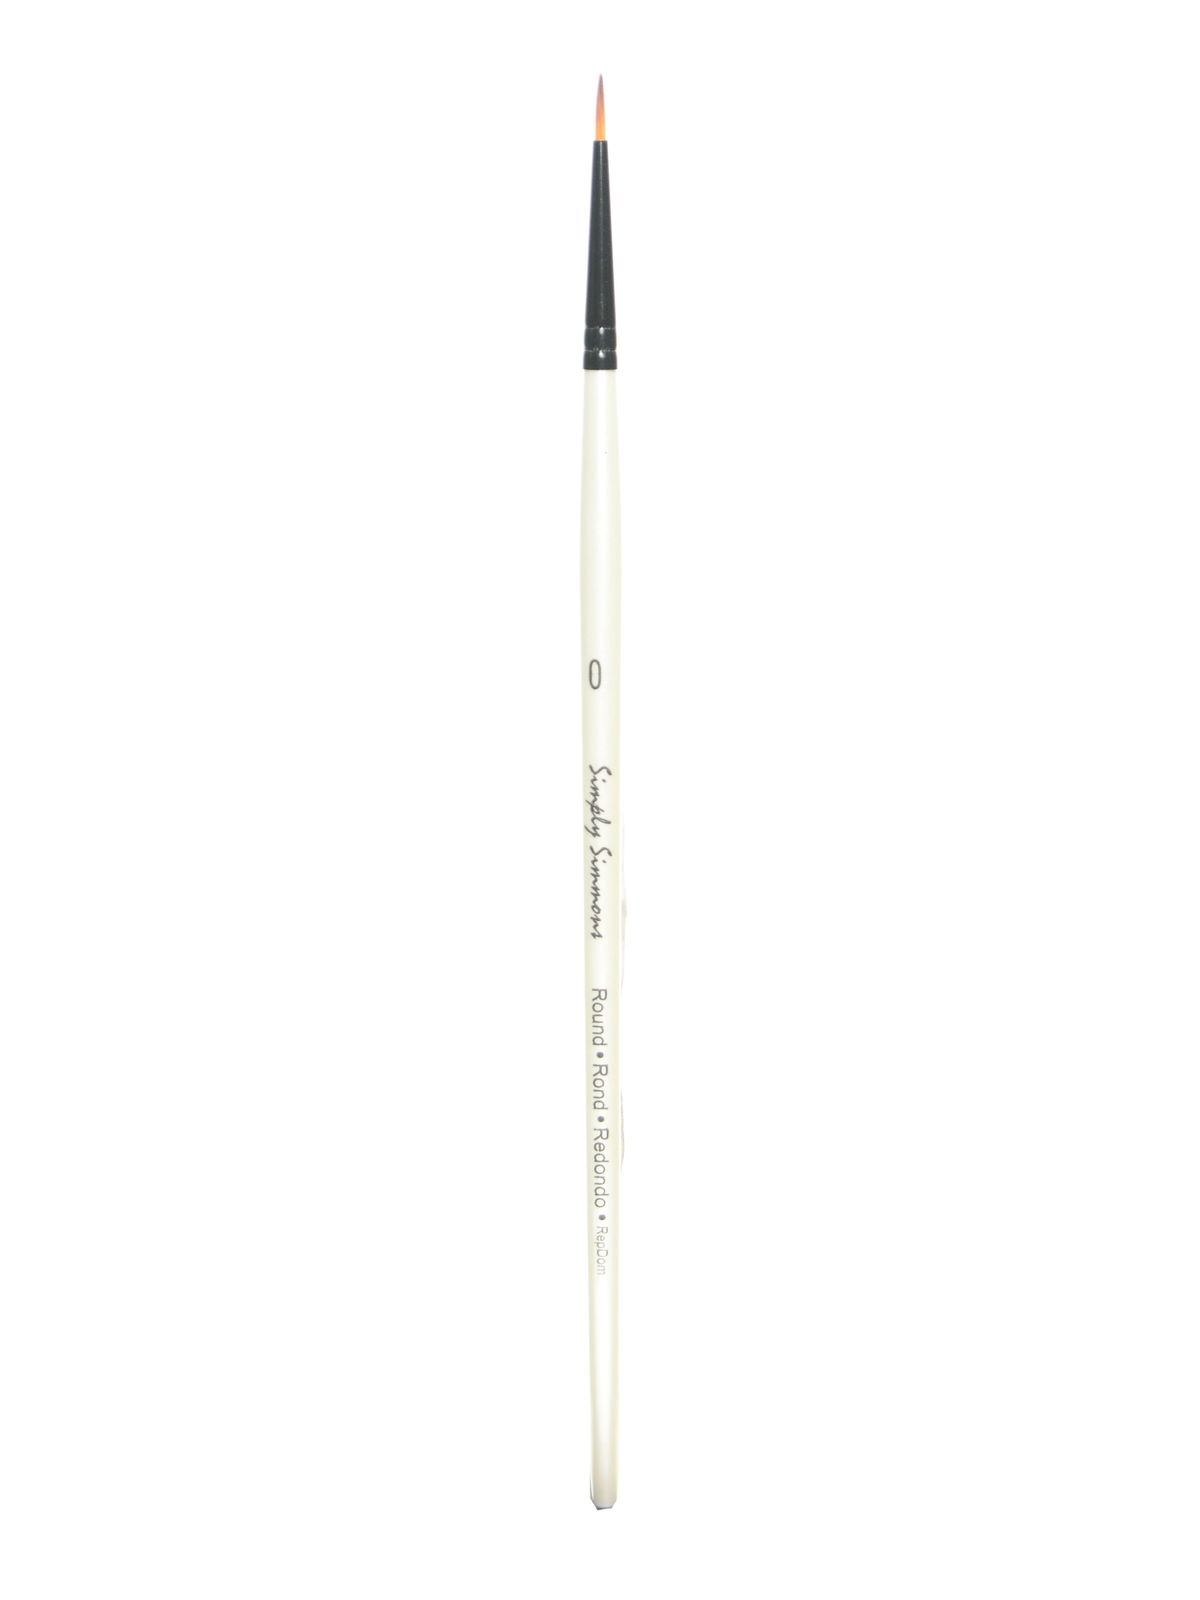 Simply Simmons Watercolor & Acrylic Short-handle Brushes 0 Round Synthetic Mix